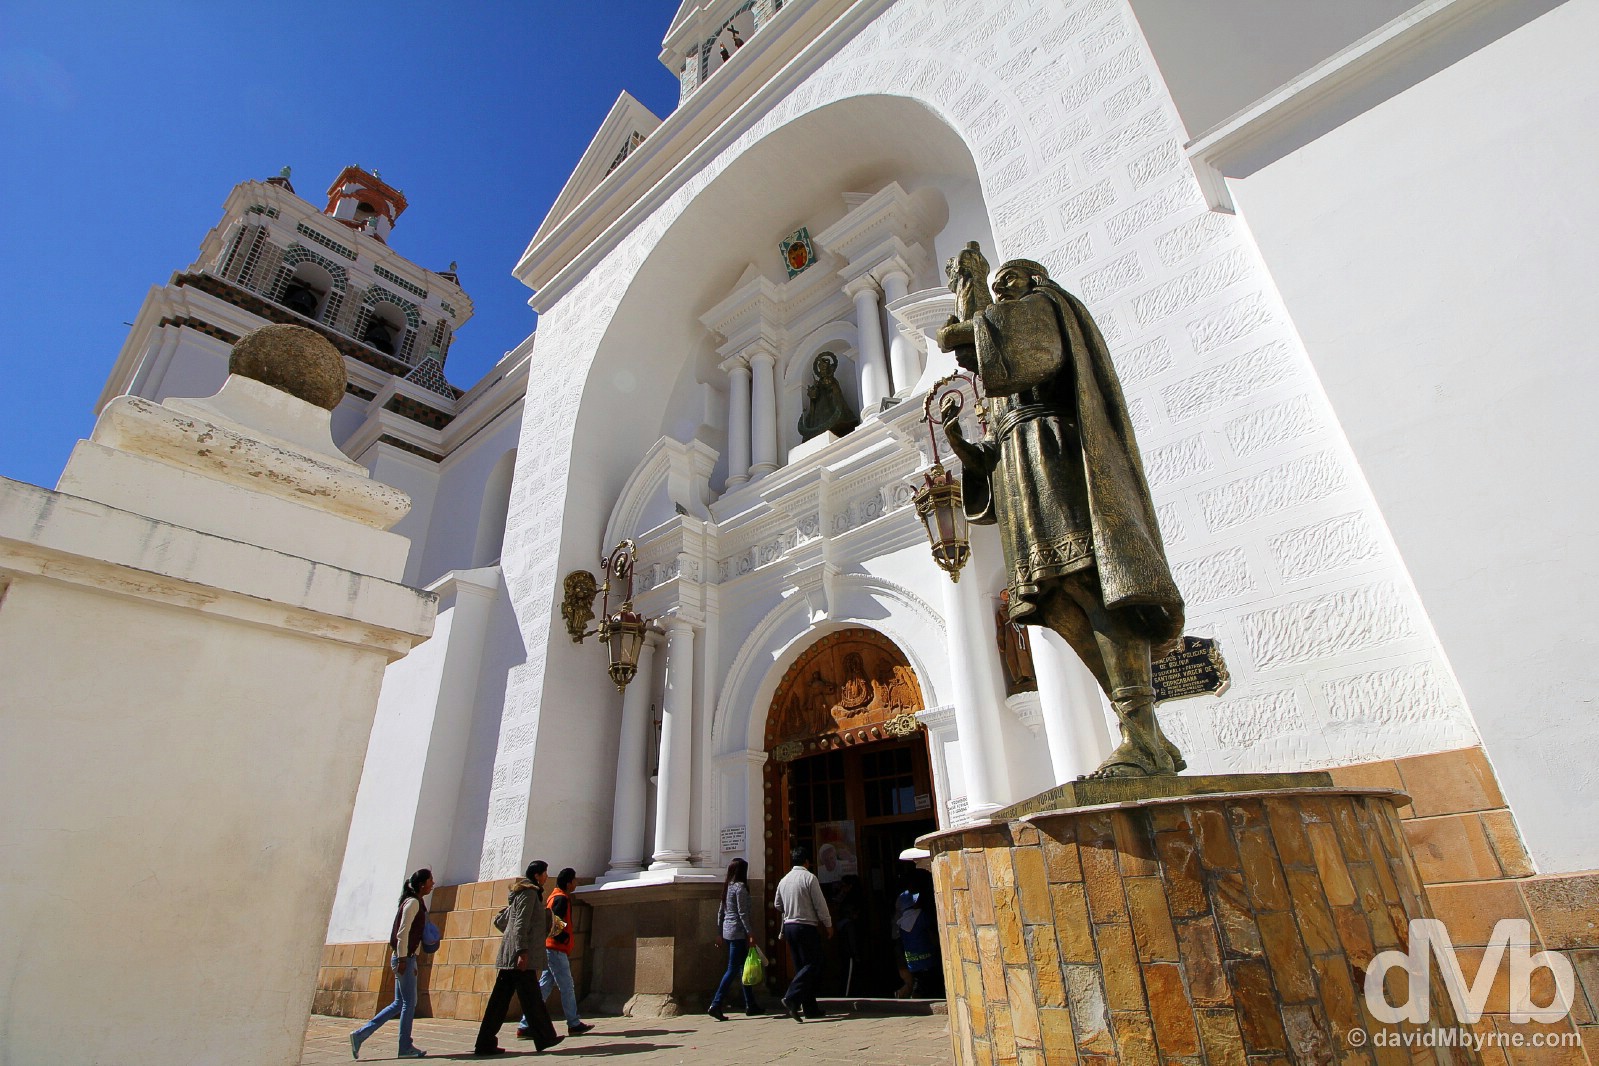 The Catedral in Copacabana, Bolivia. August 23, 2015.